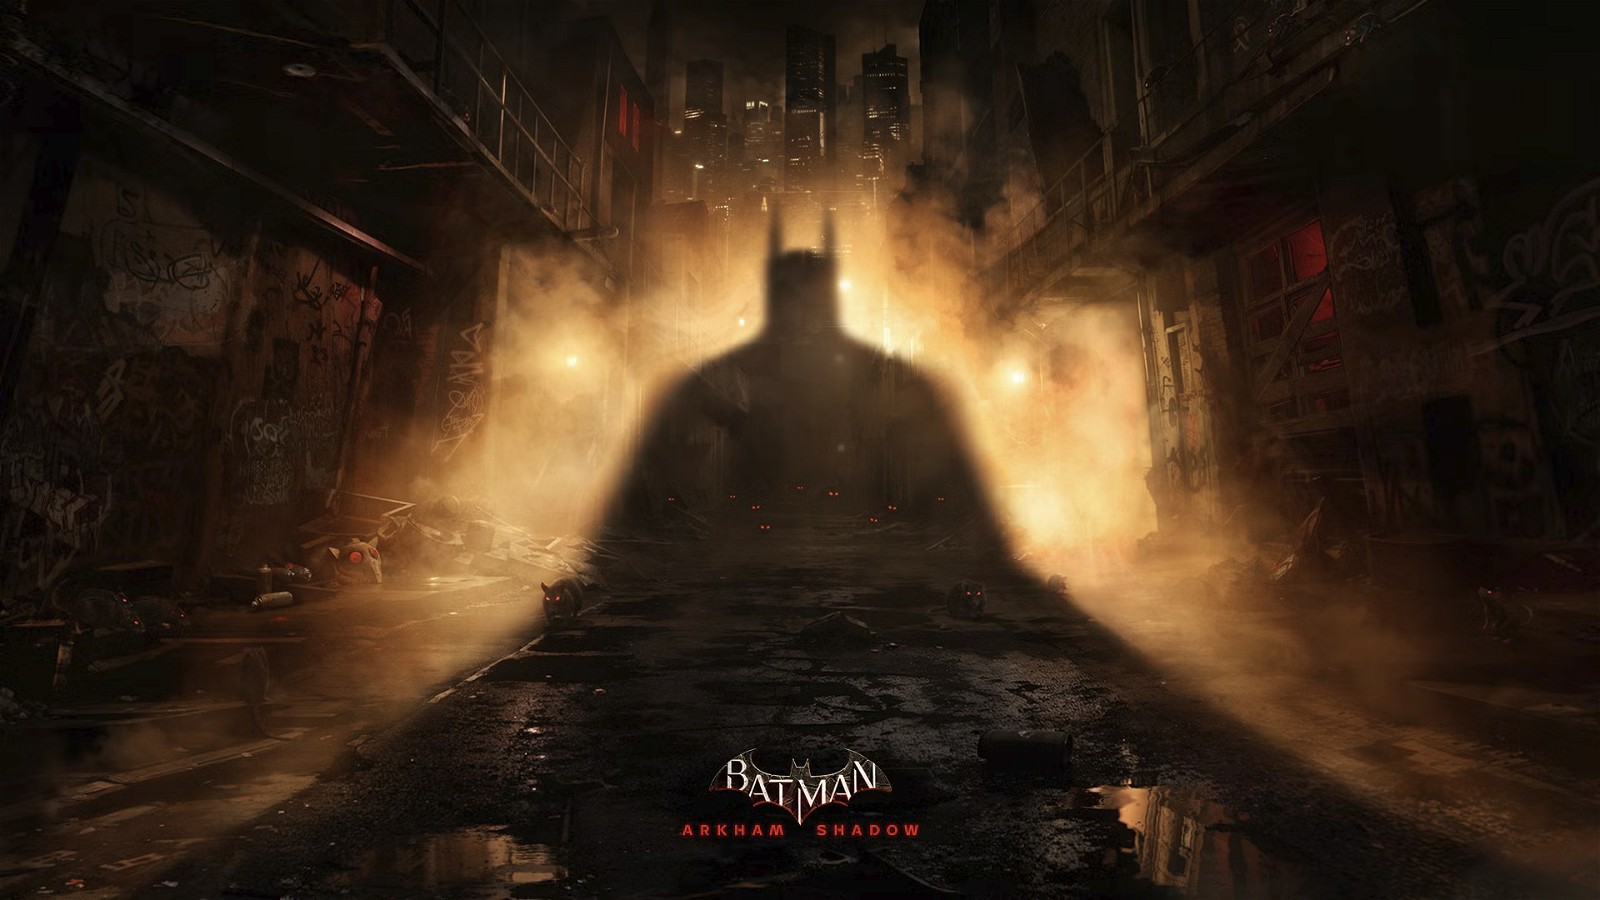 Arkham Shadow has the chance to be the most immersive superhero game on the market.